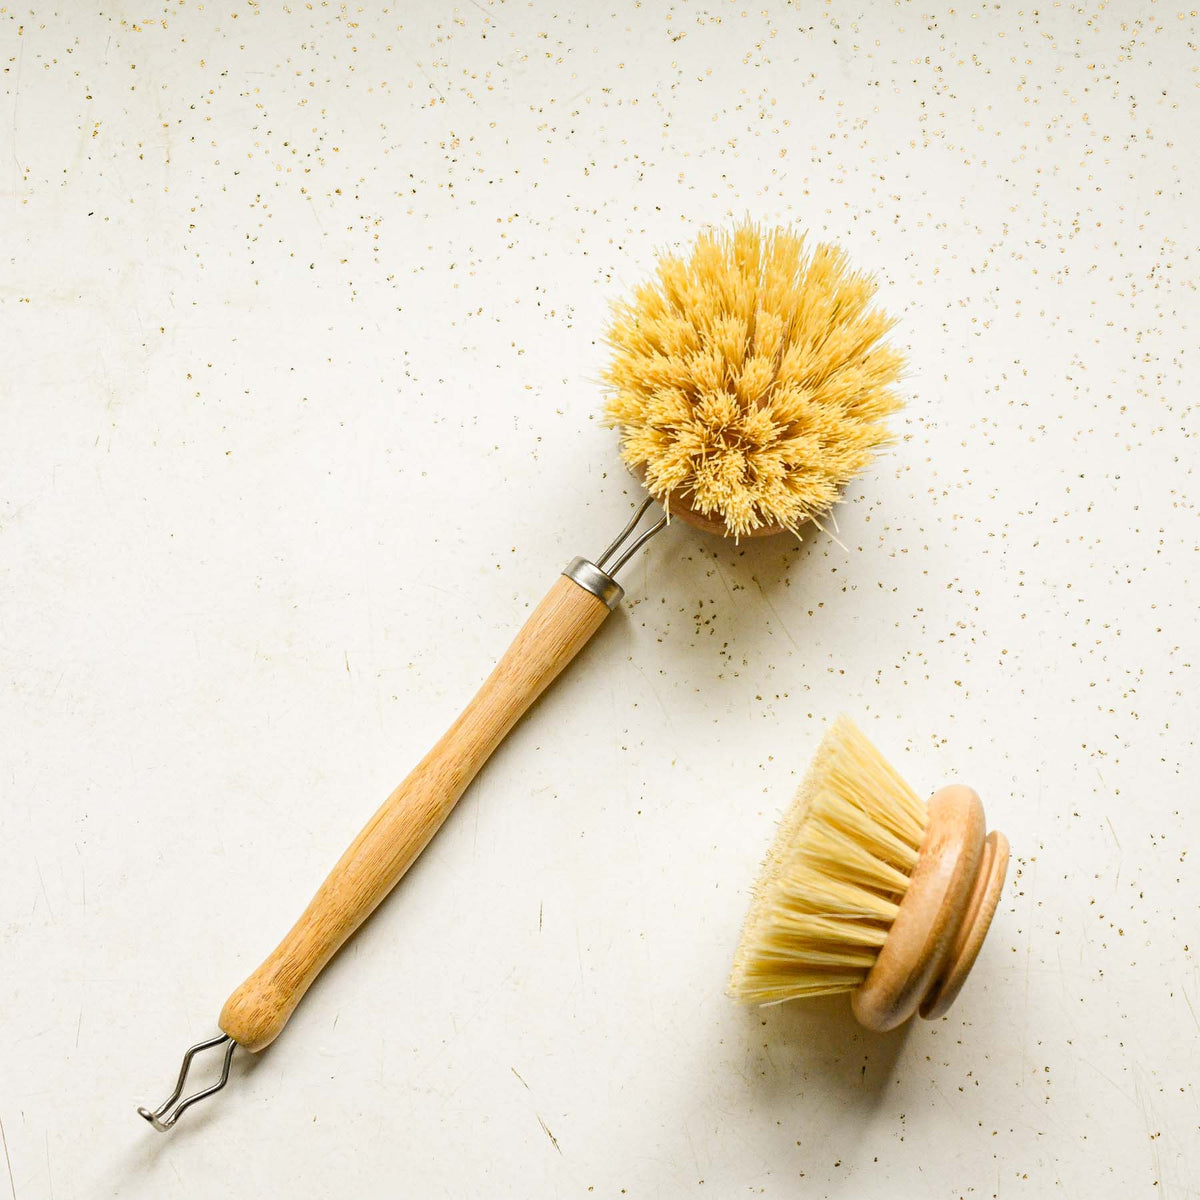 Dish Brush  One-Piece Handle & Replaceable Brush Head - What's Good